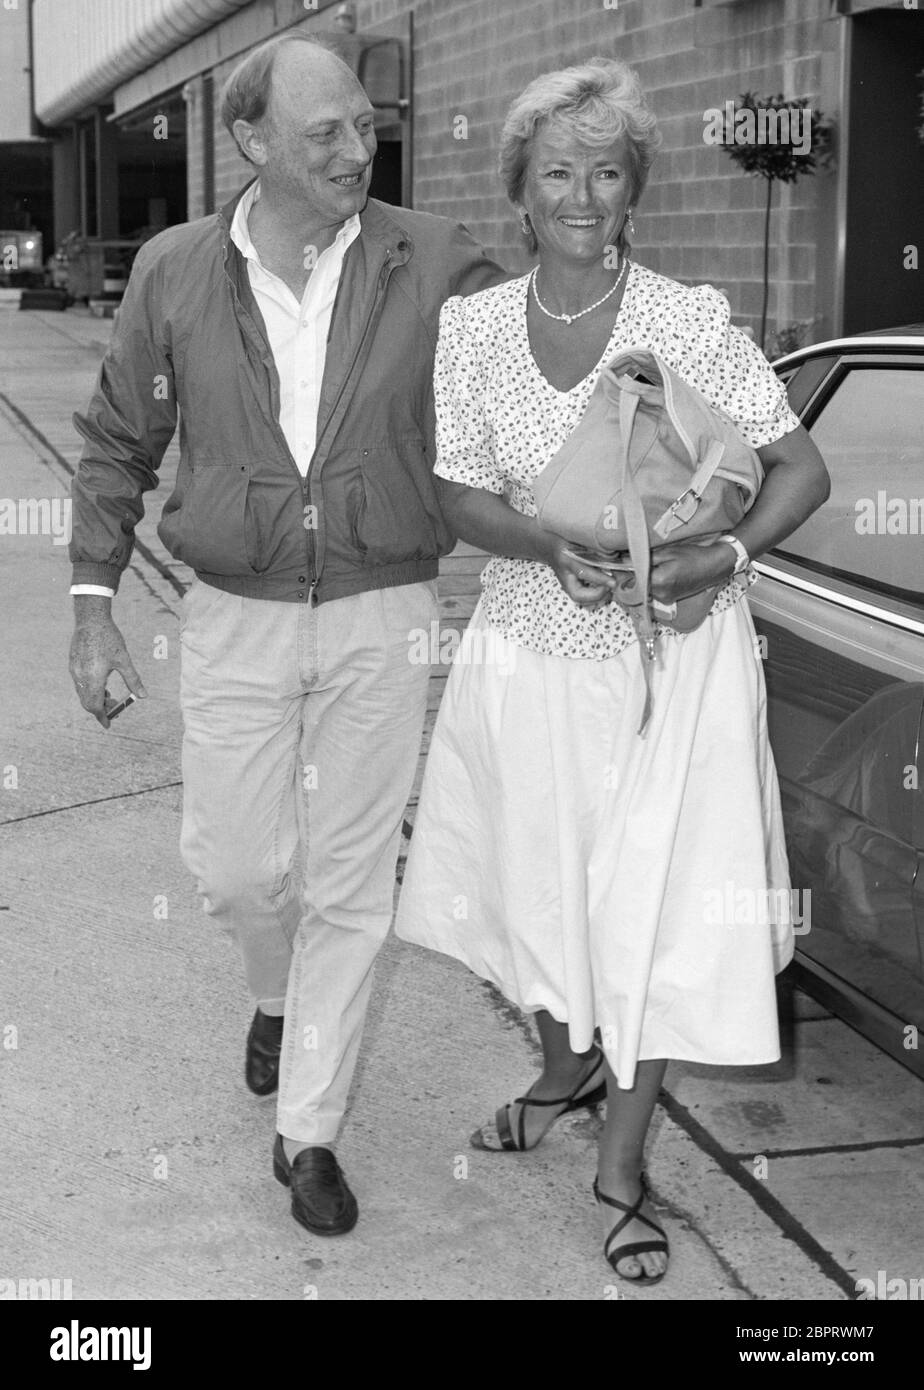 Labour leader Neil Kinnock and wife Glenys arriving at  London's Heathrow Airport in August 1987. Stock Photo